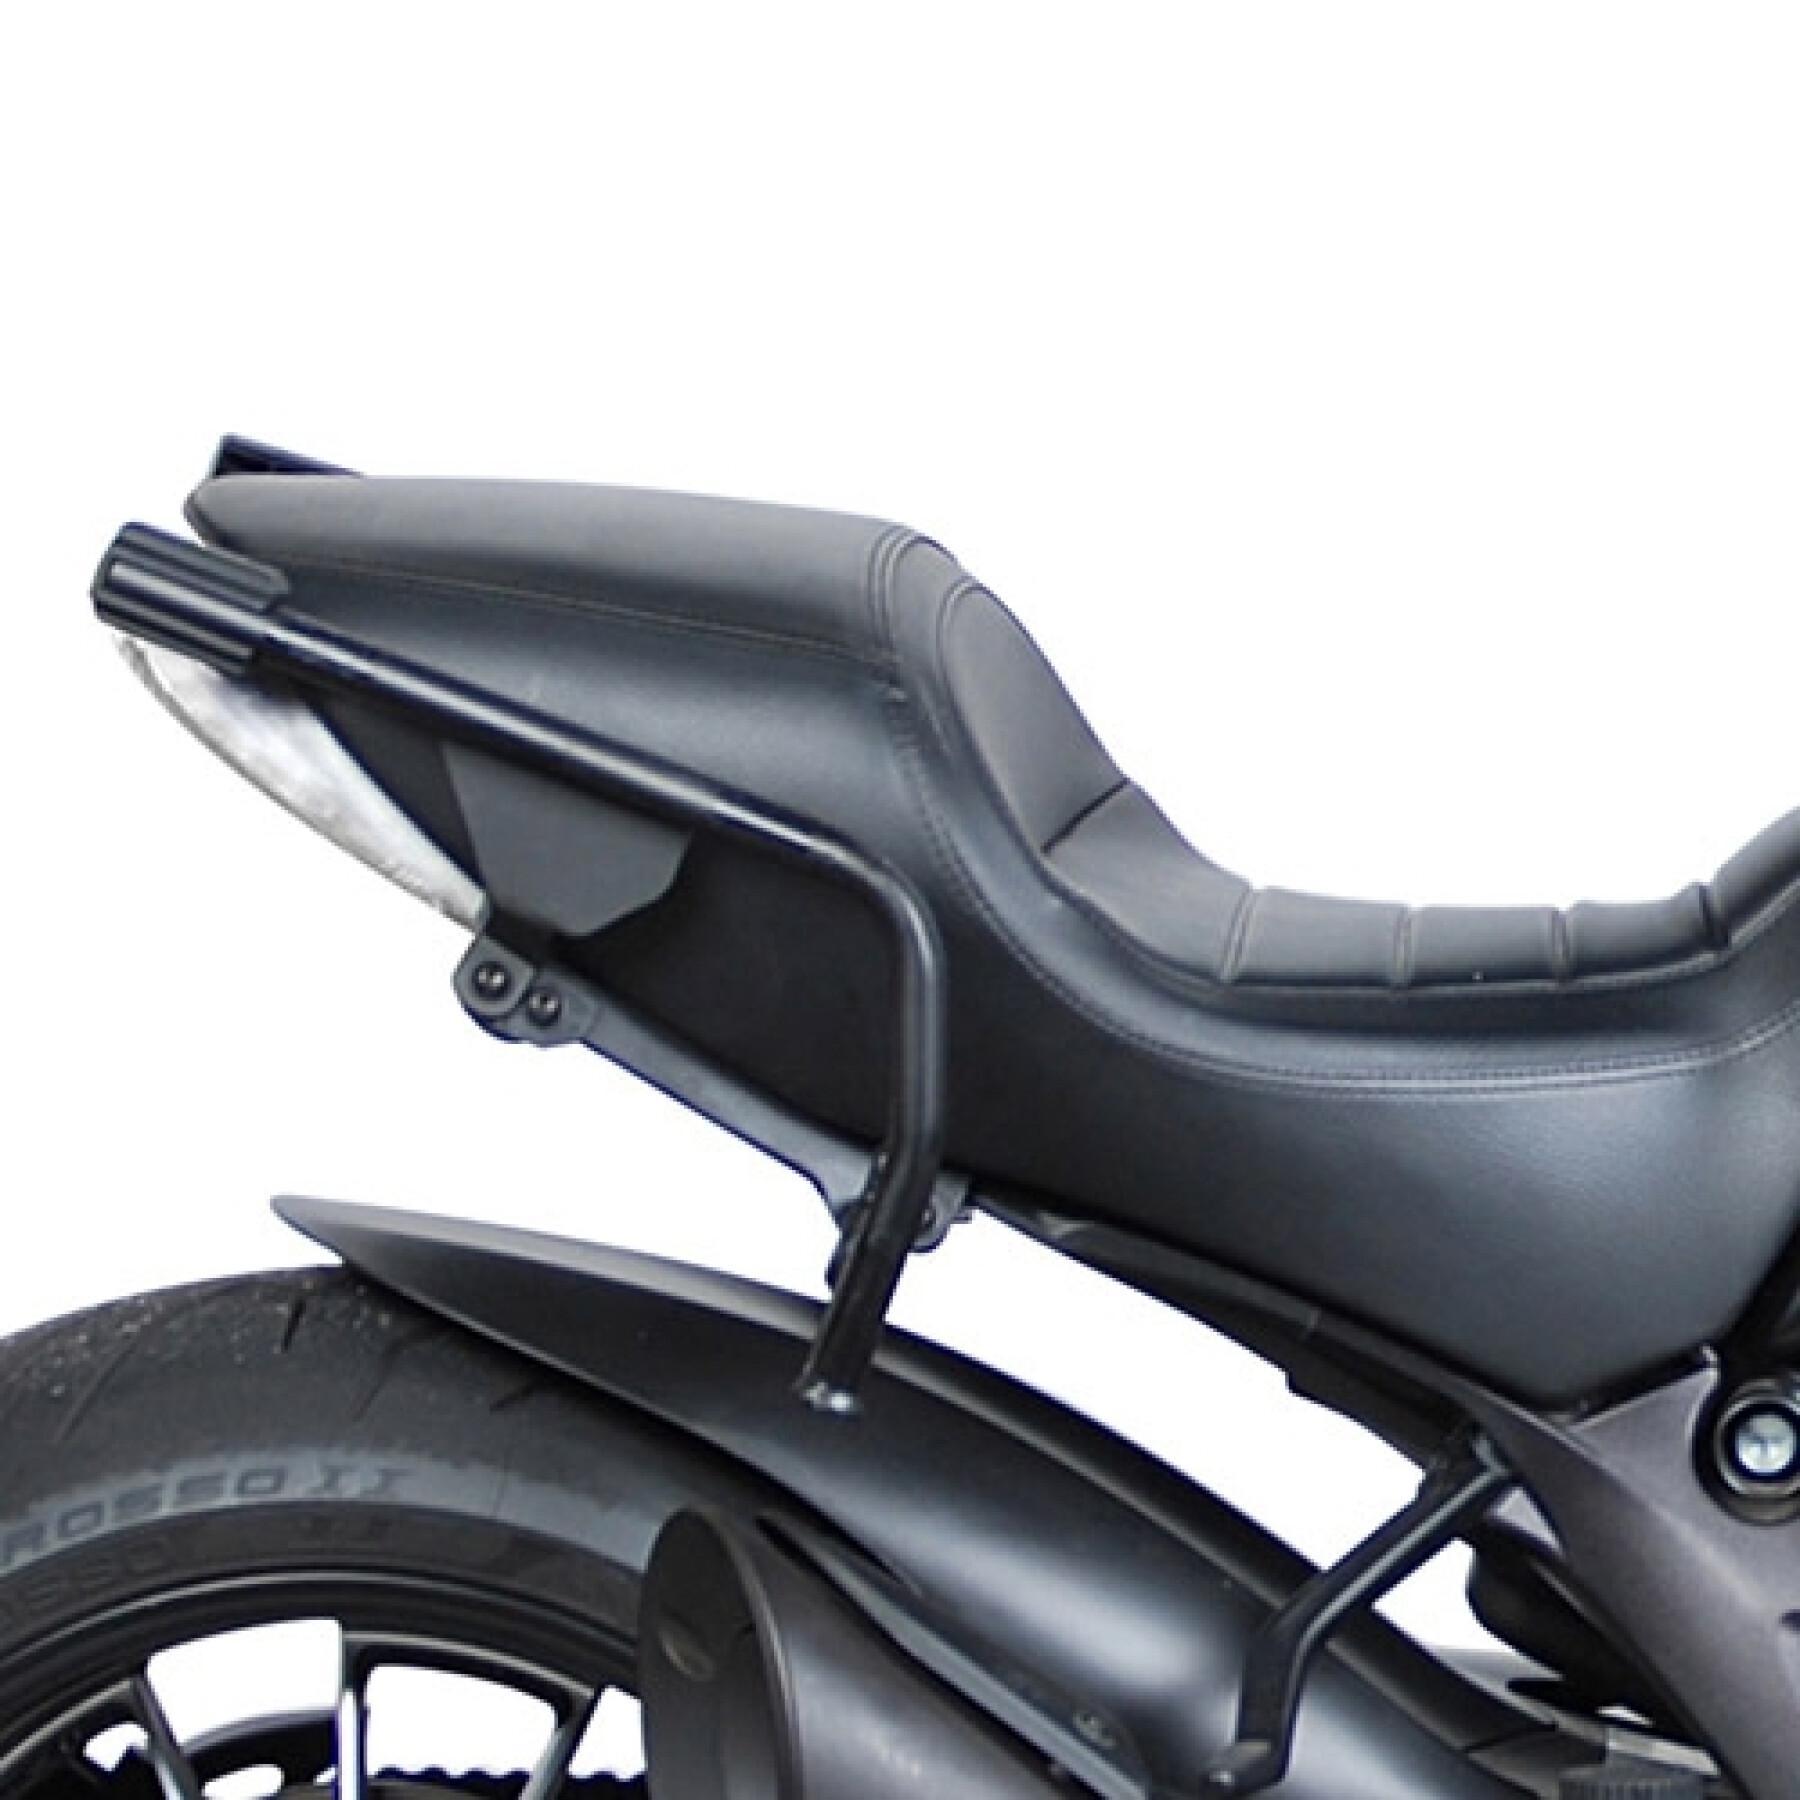 Motorcycle side cases support Shad 3P System Ducati 1200 Diavel (12 TO 18)